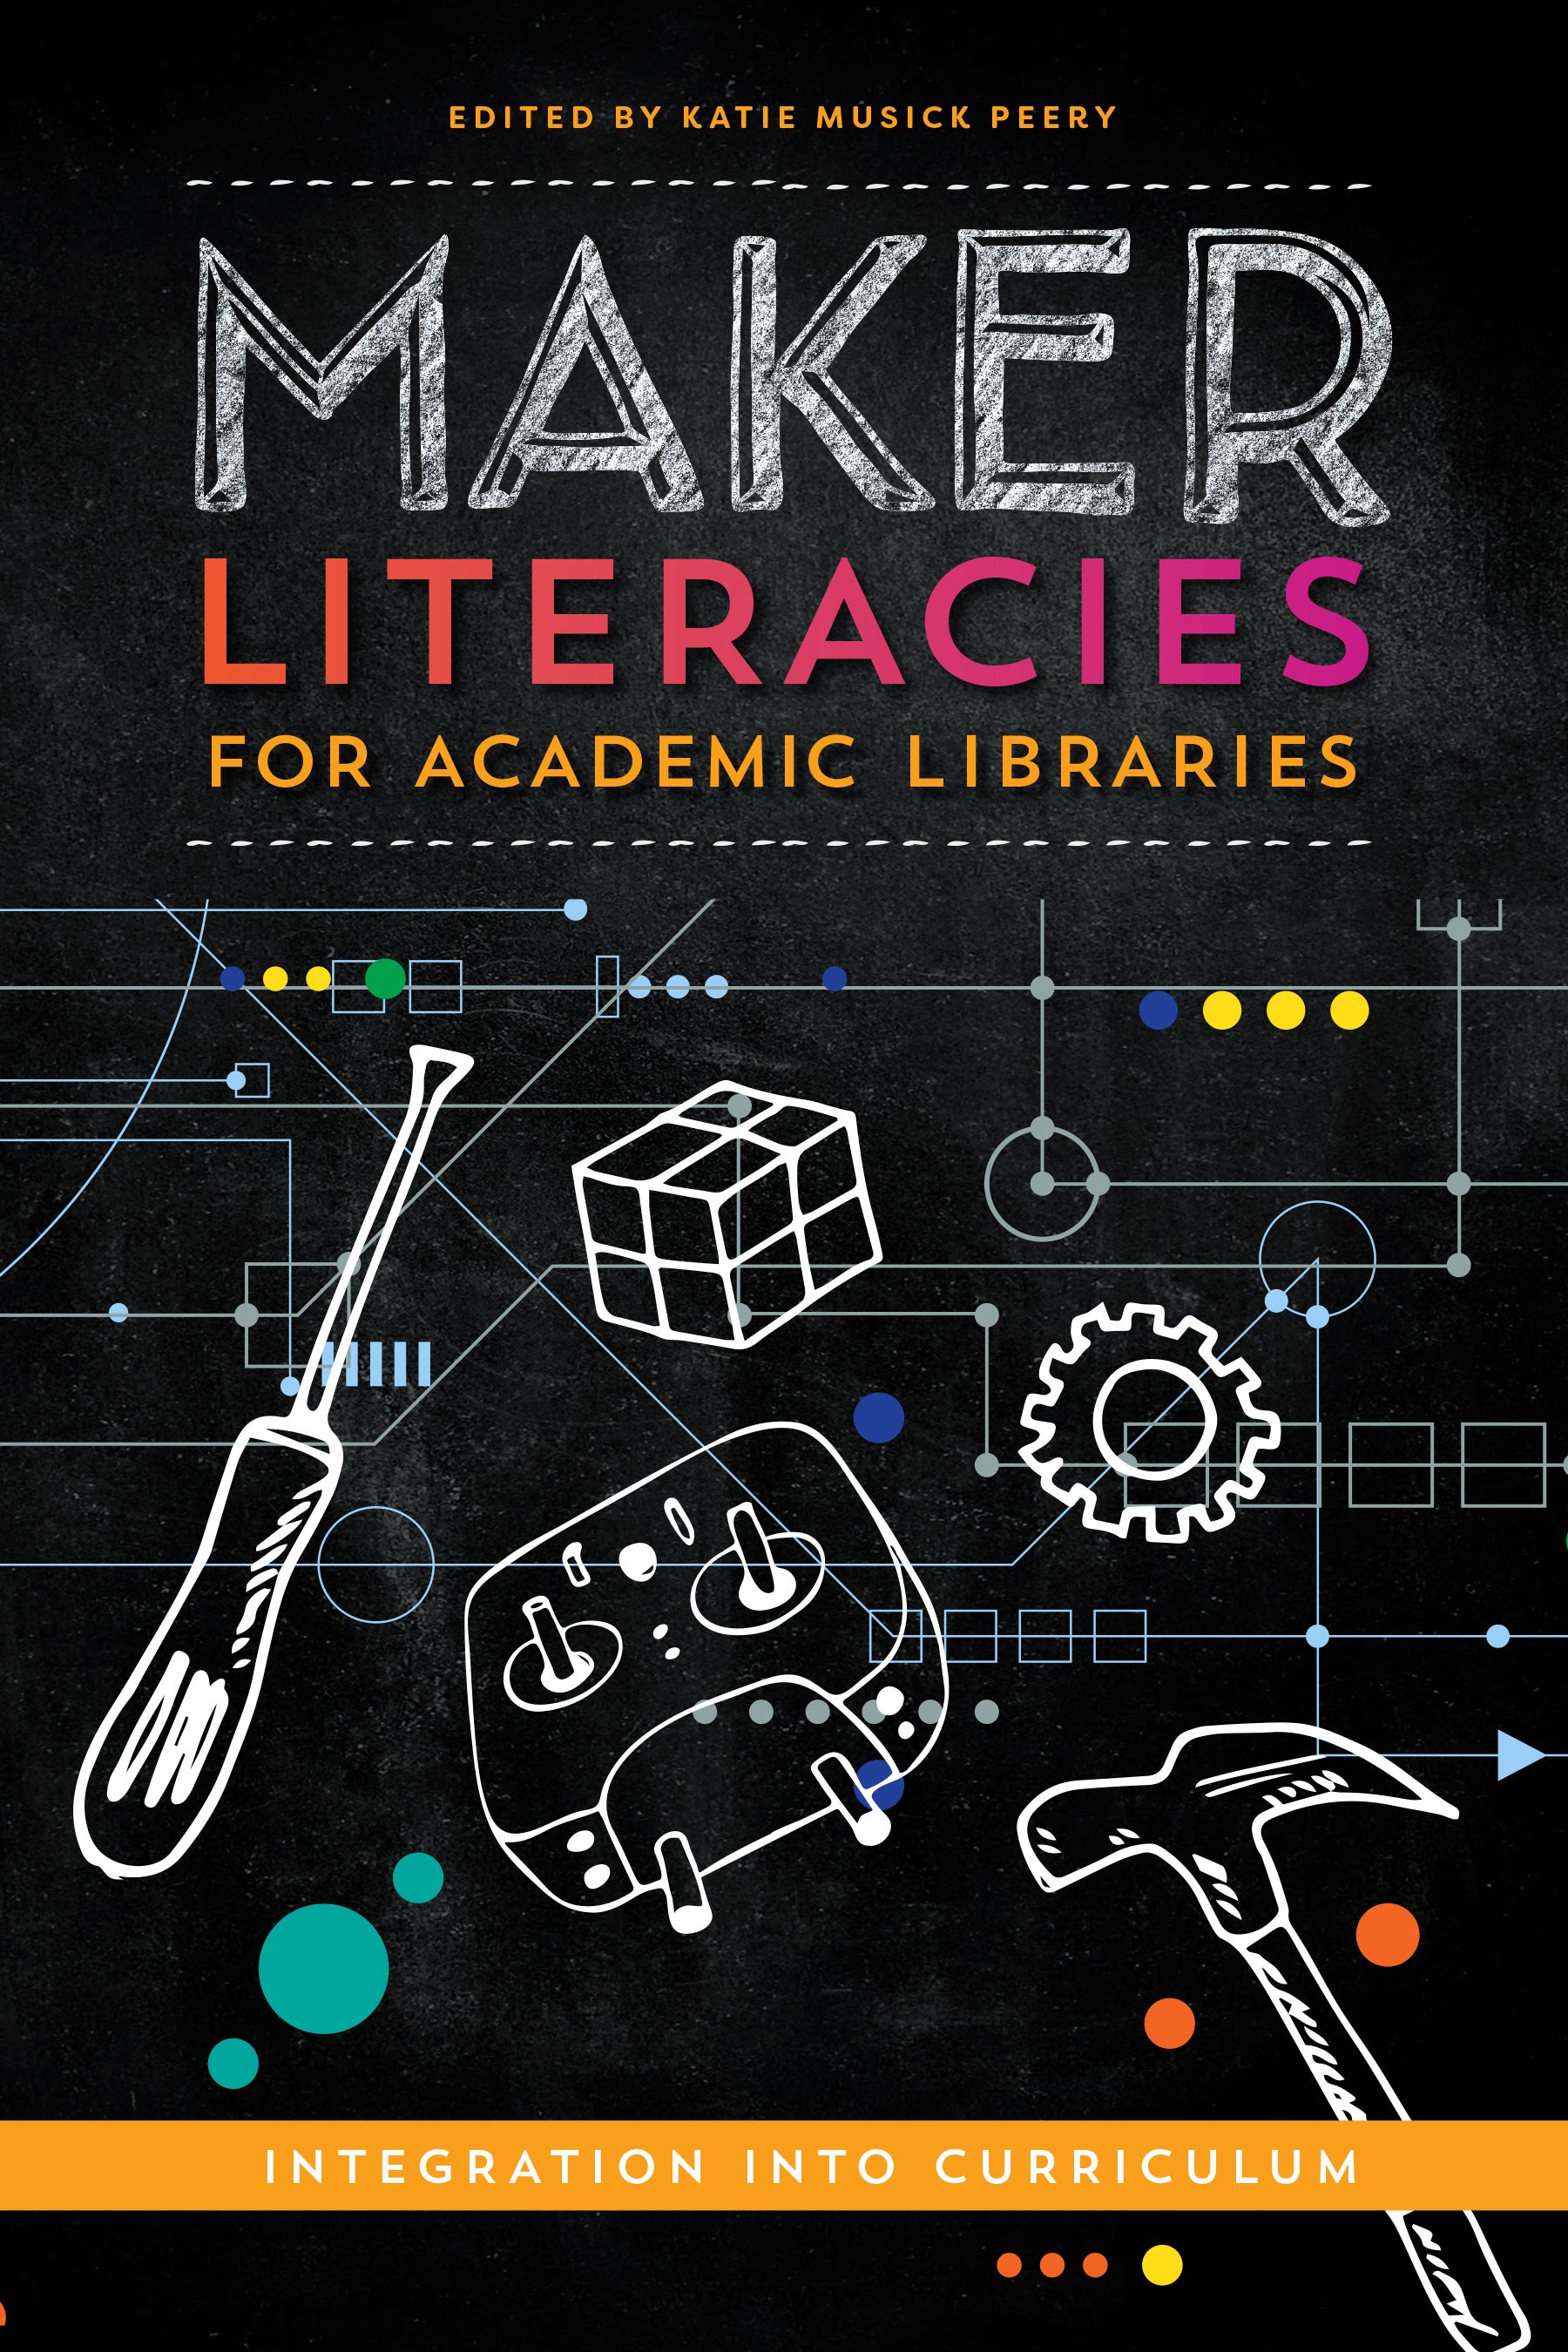 Makter Literacies for academic libraries book cover